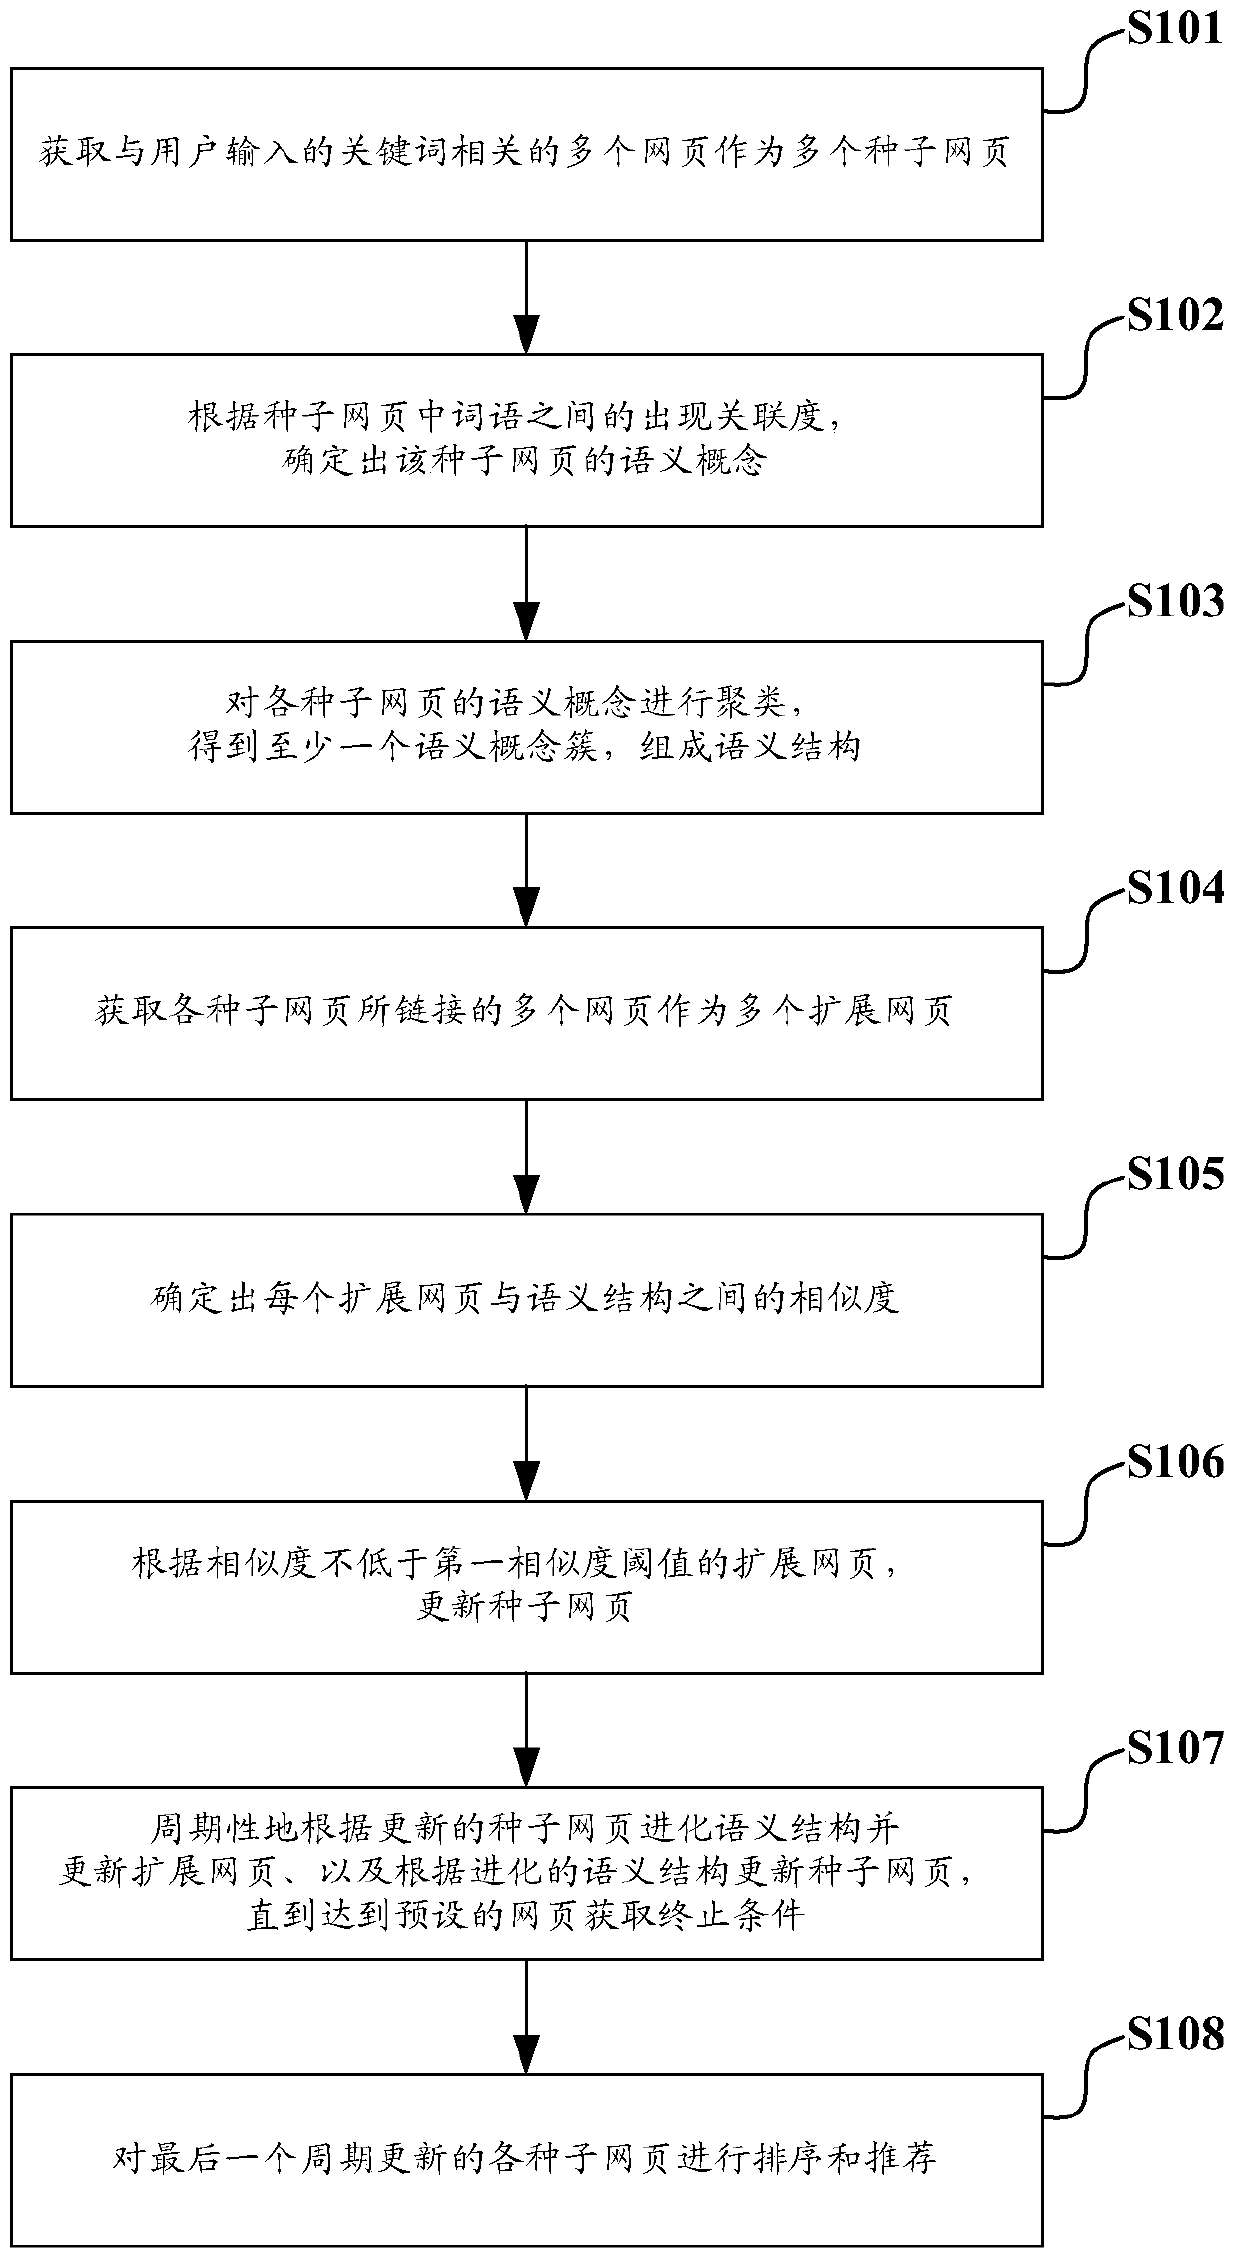 Method and device for web page collection and recommendation